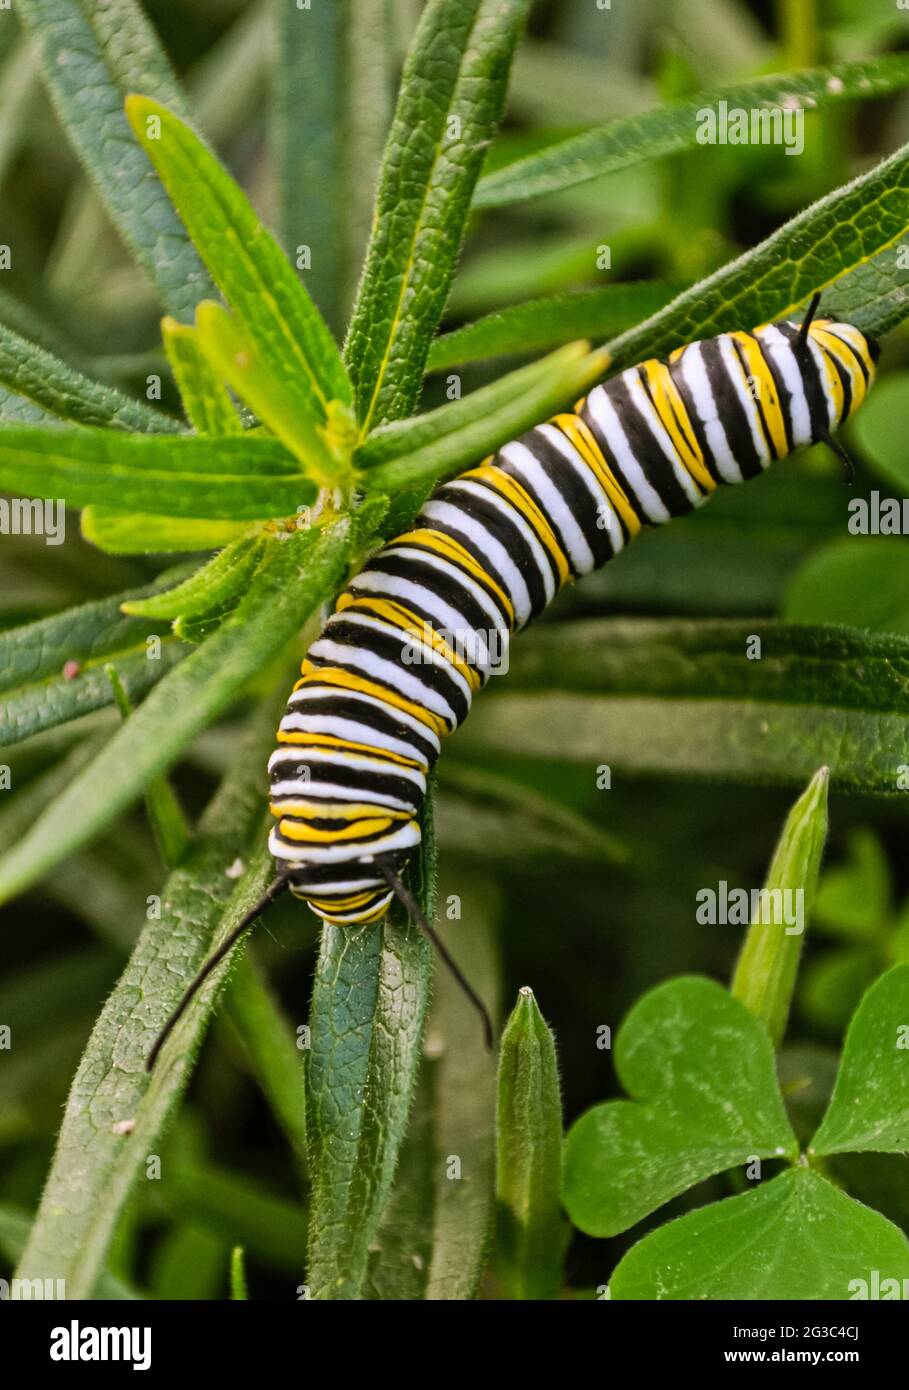 A Monarch caterpillar (Danaus plexippus) feeds on leaves of Butterfly weed (Asclepias tuberosa.)  Closeup. Stock Photo